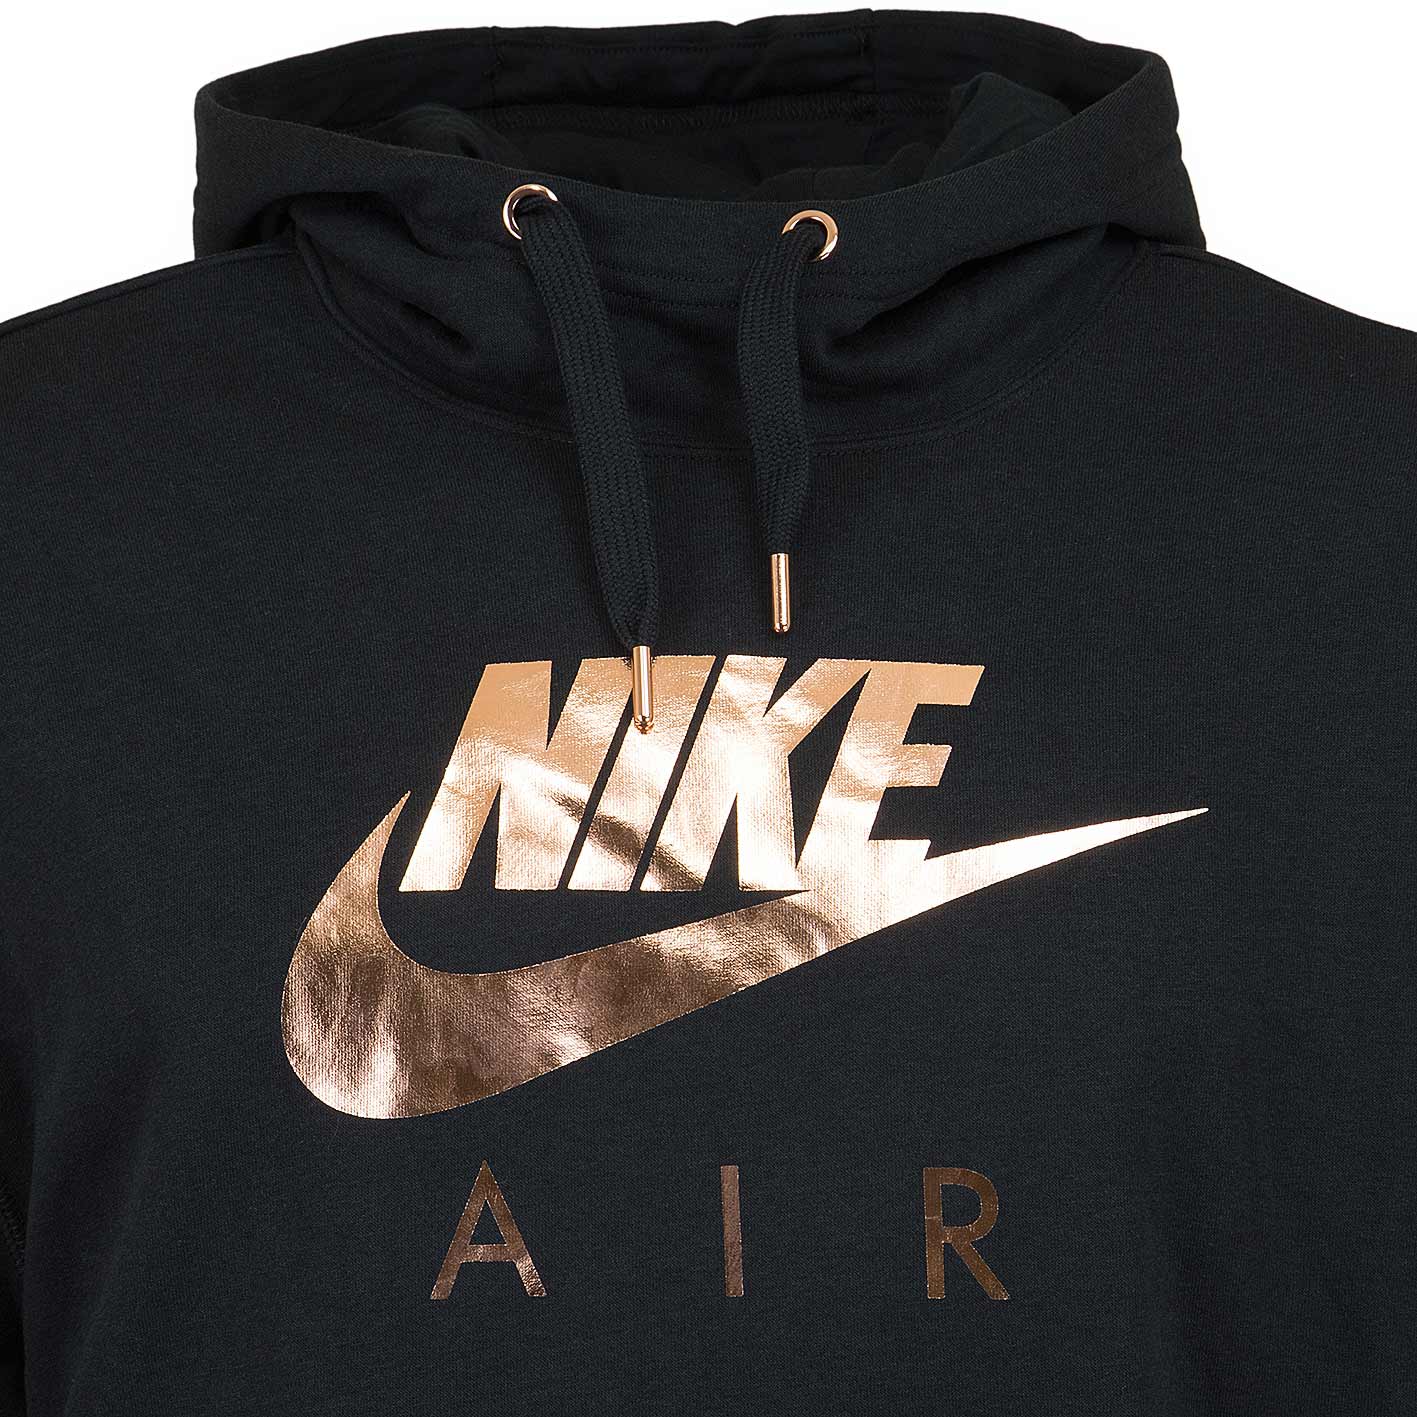 buy > nike sportswear air os hoody > Up to 77% OFF > Free shipping